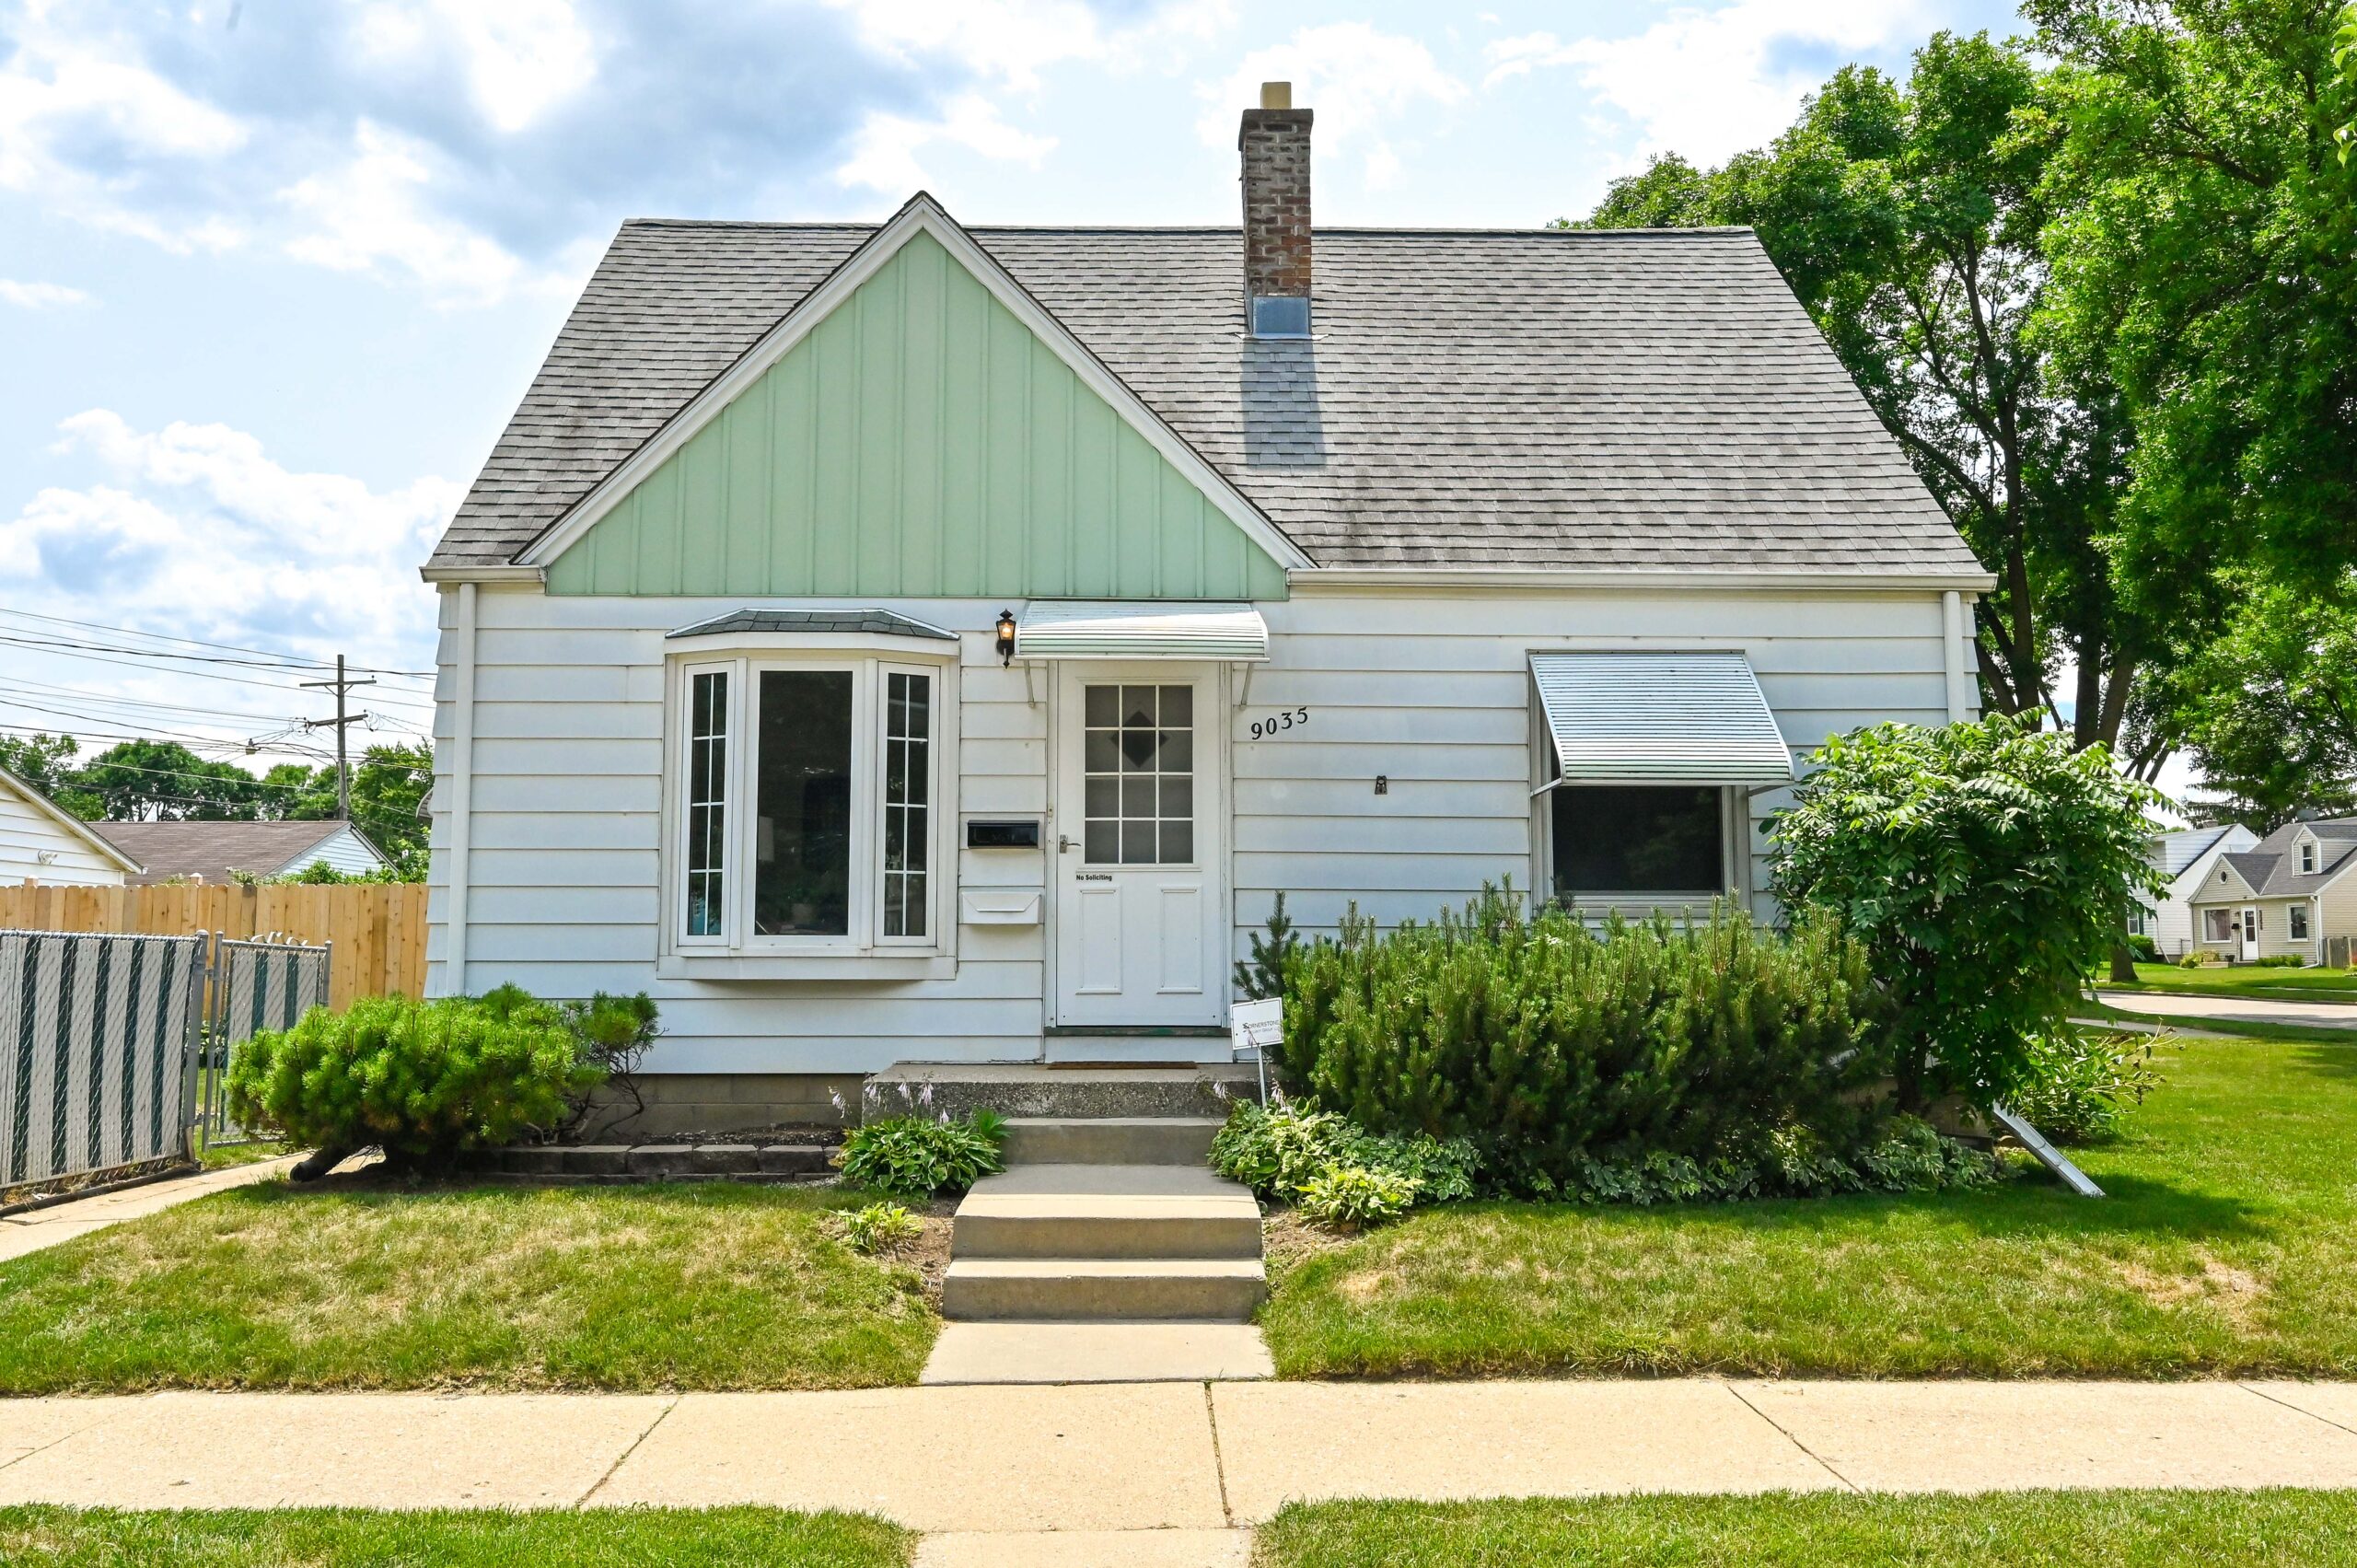  Home for Sale - 9035 W. Townsend St. Milwaukee, WI 53222-3657